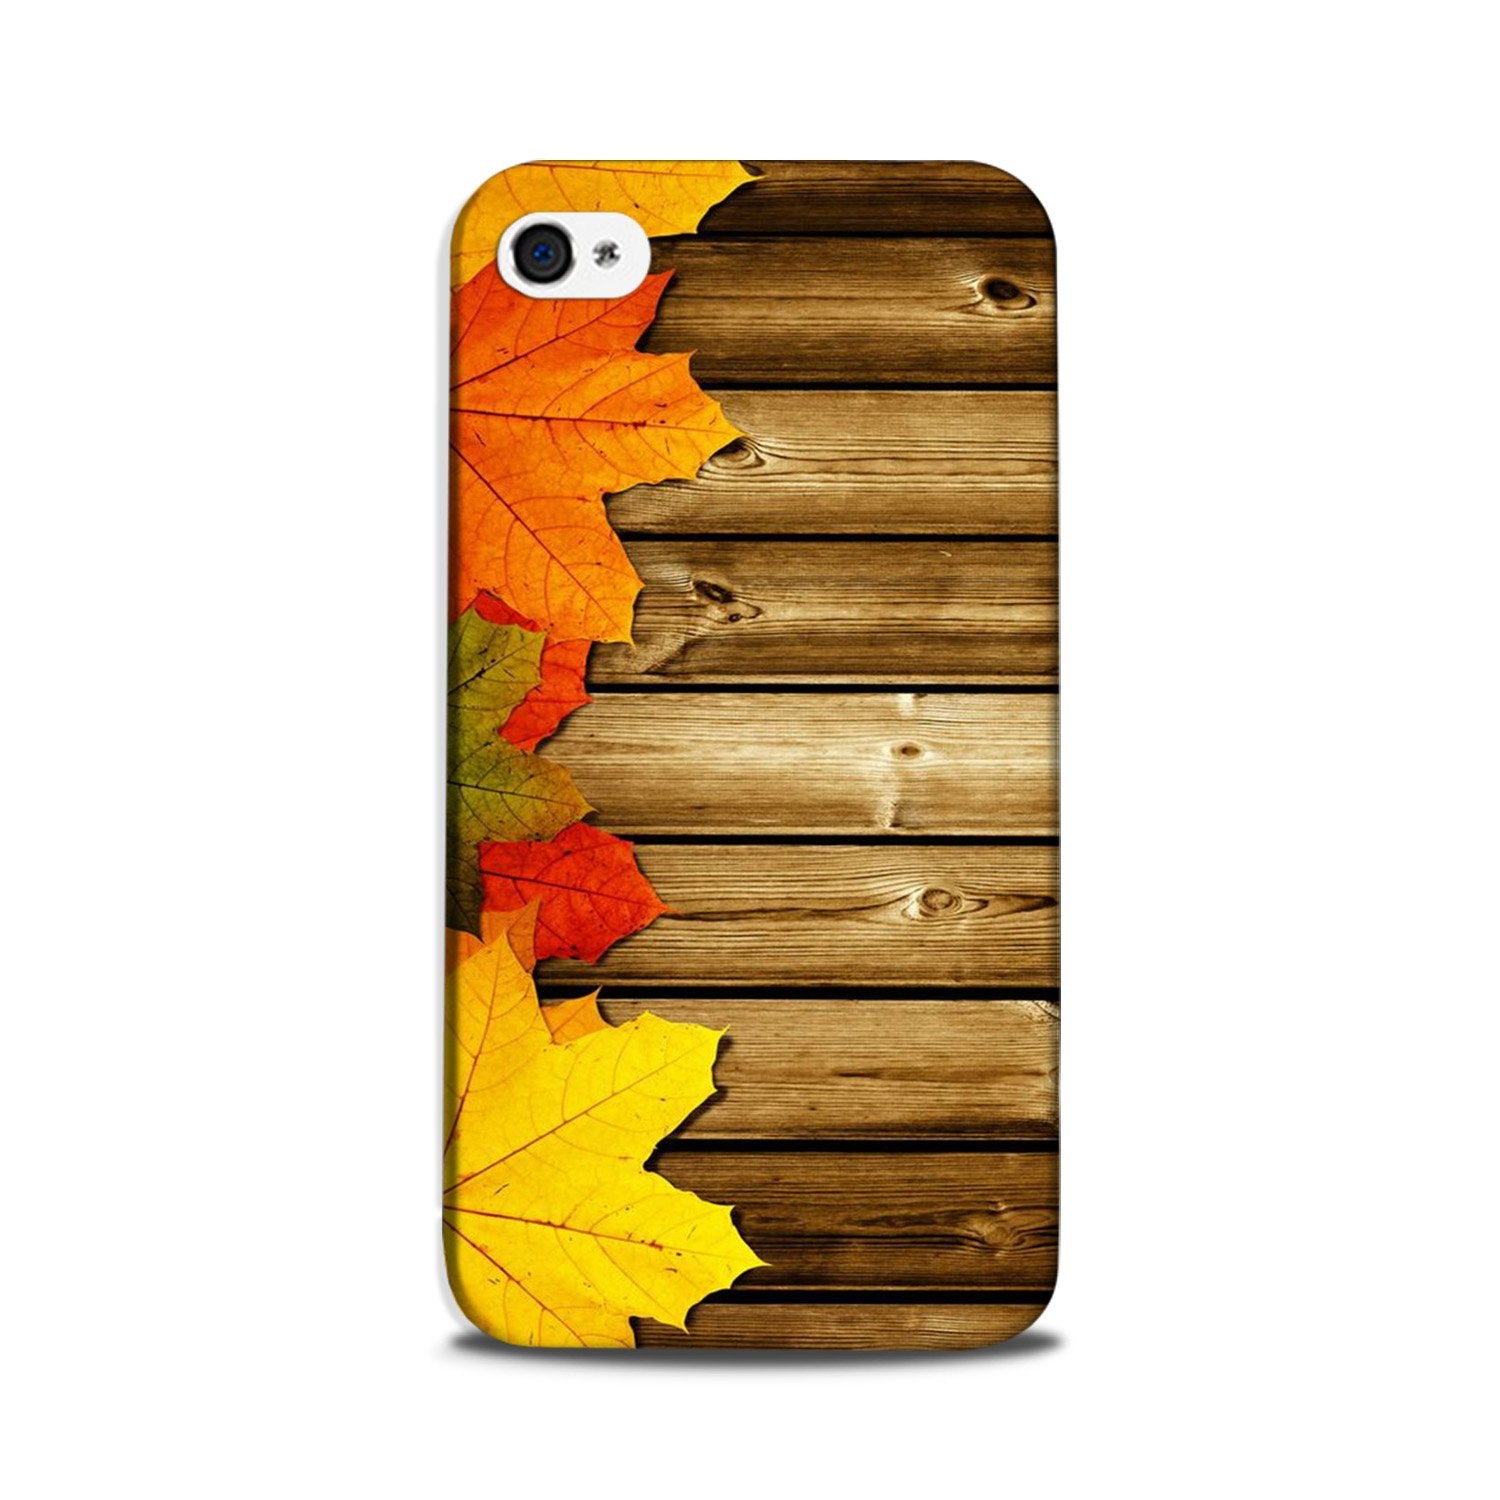 Wooden look3 Case for iPhone 5/ 5s